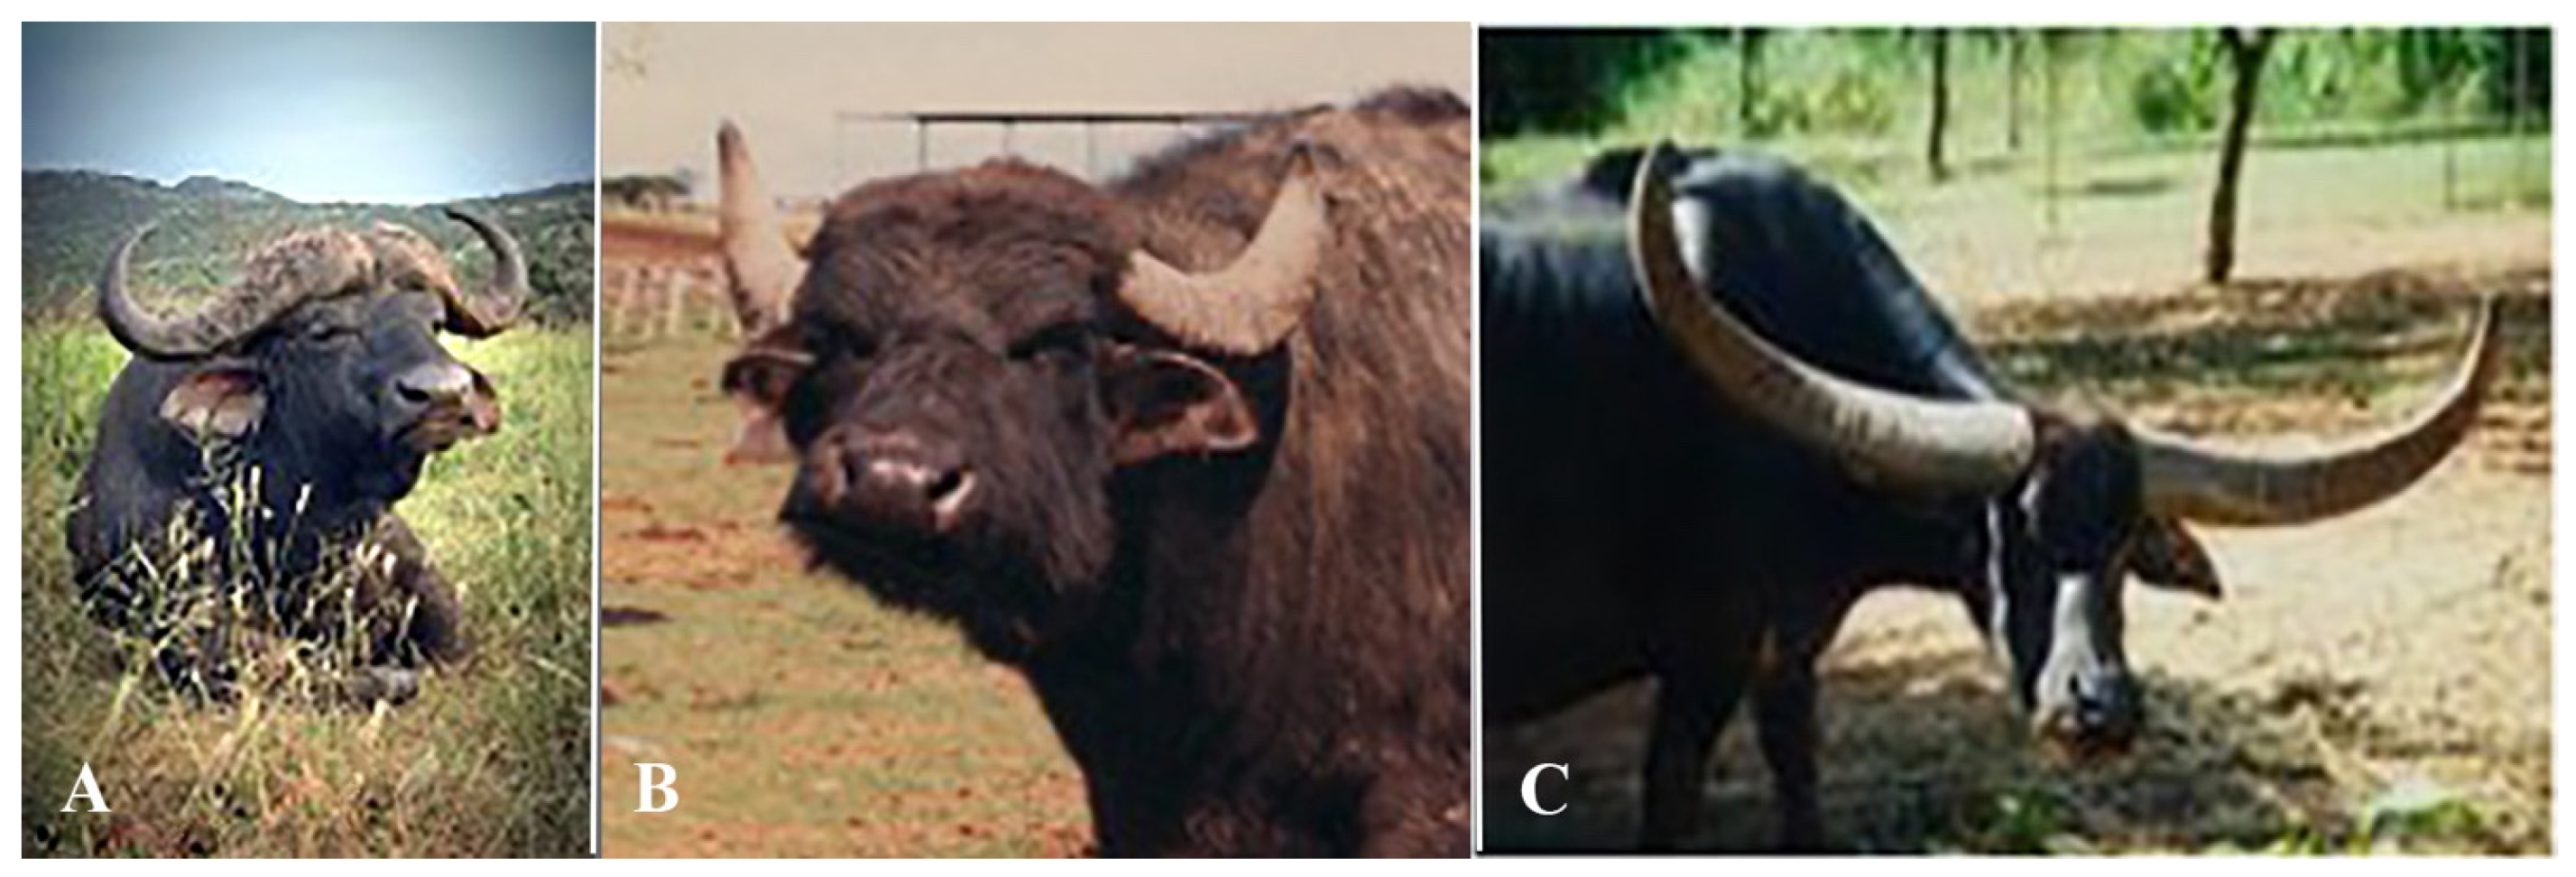 Water Buffalo vs BisonIs there a difference?